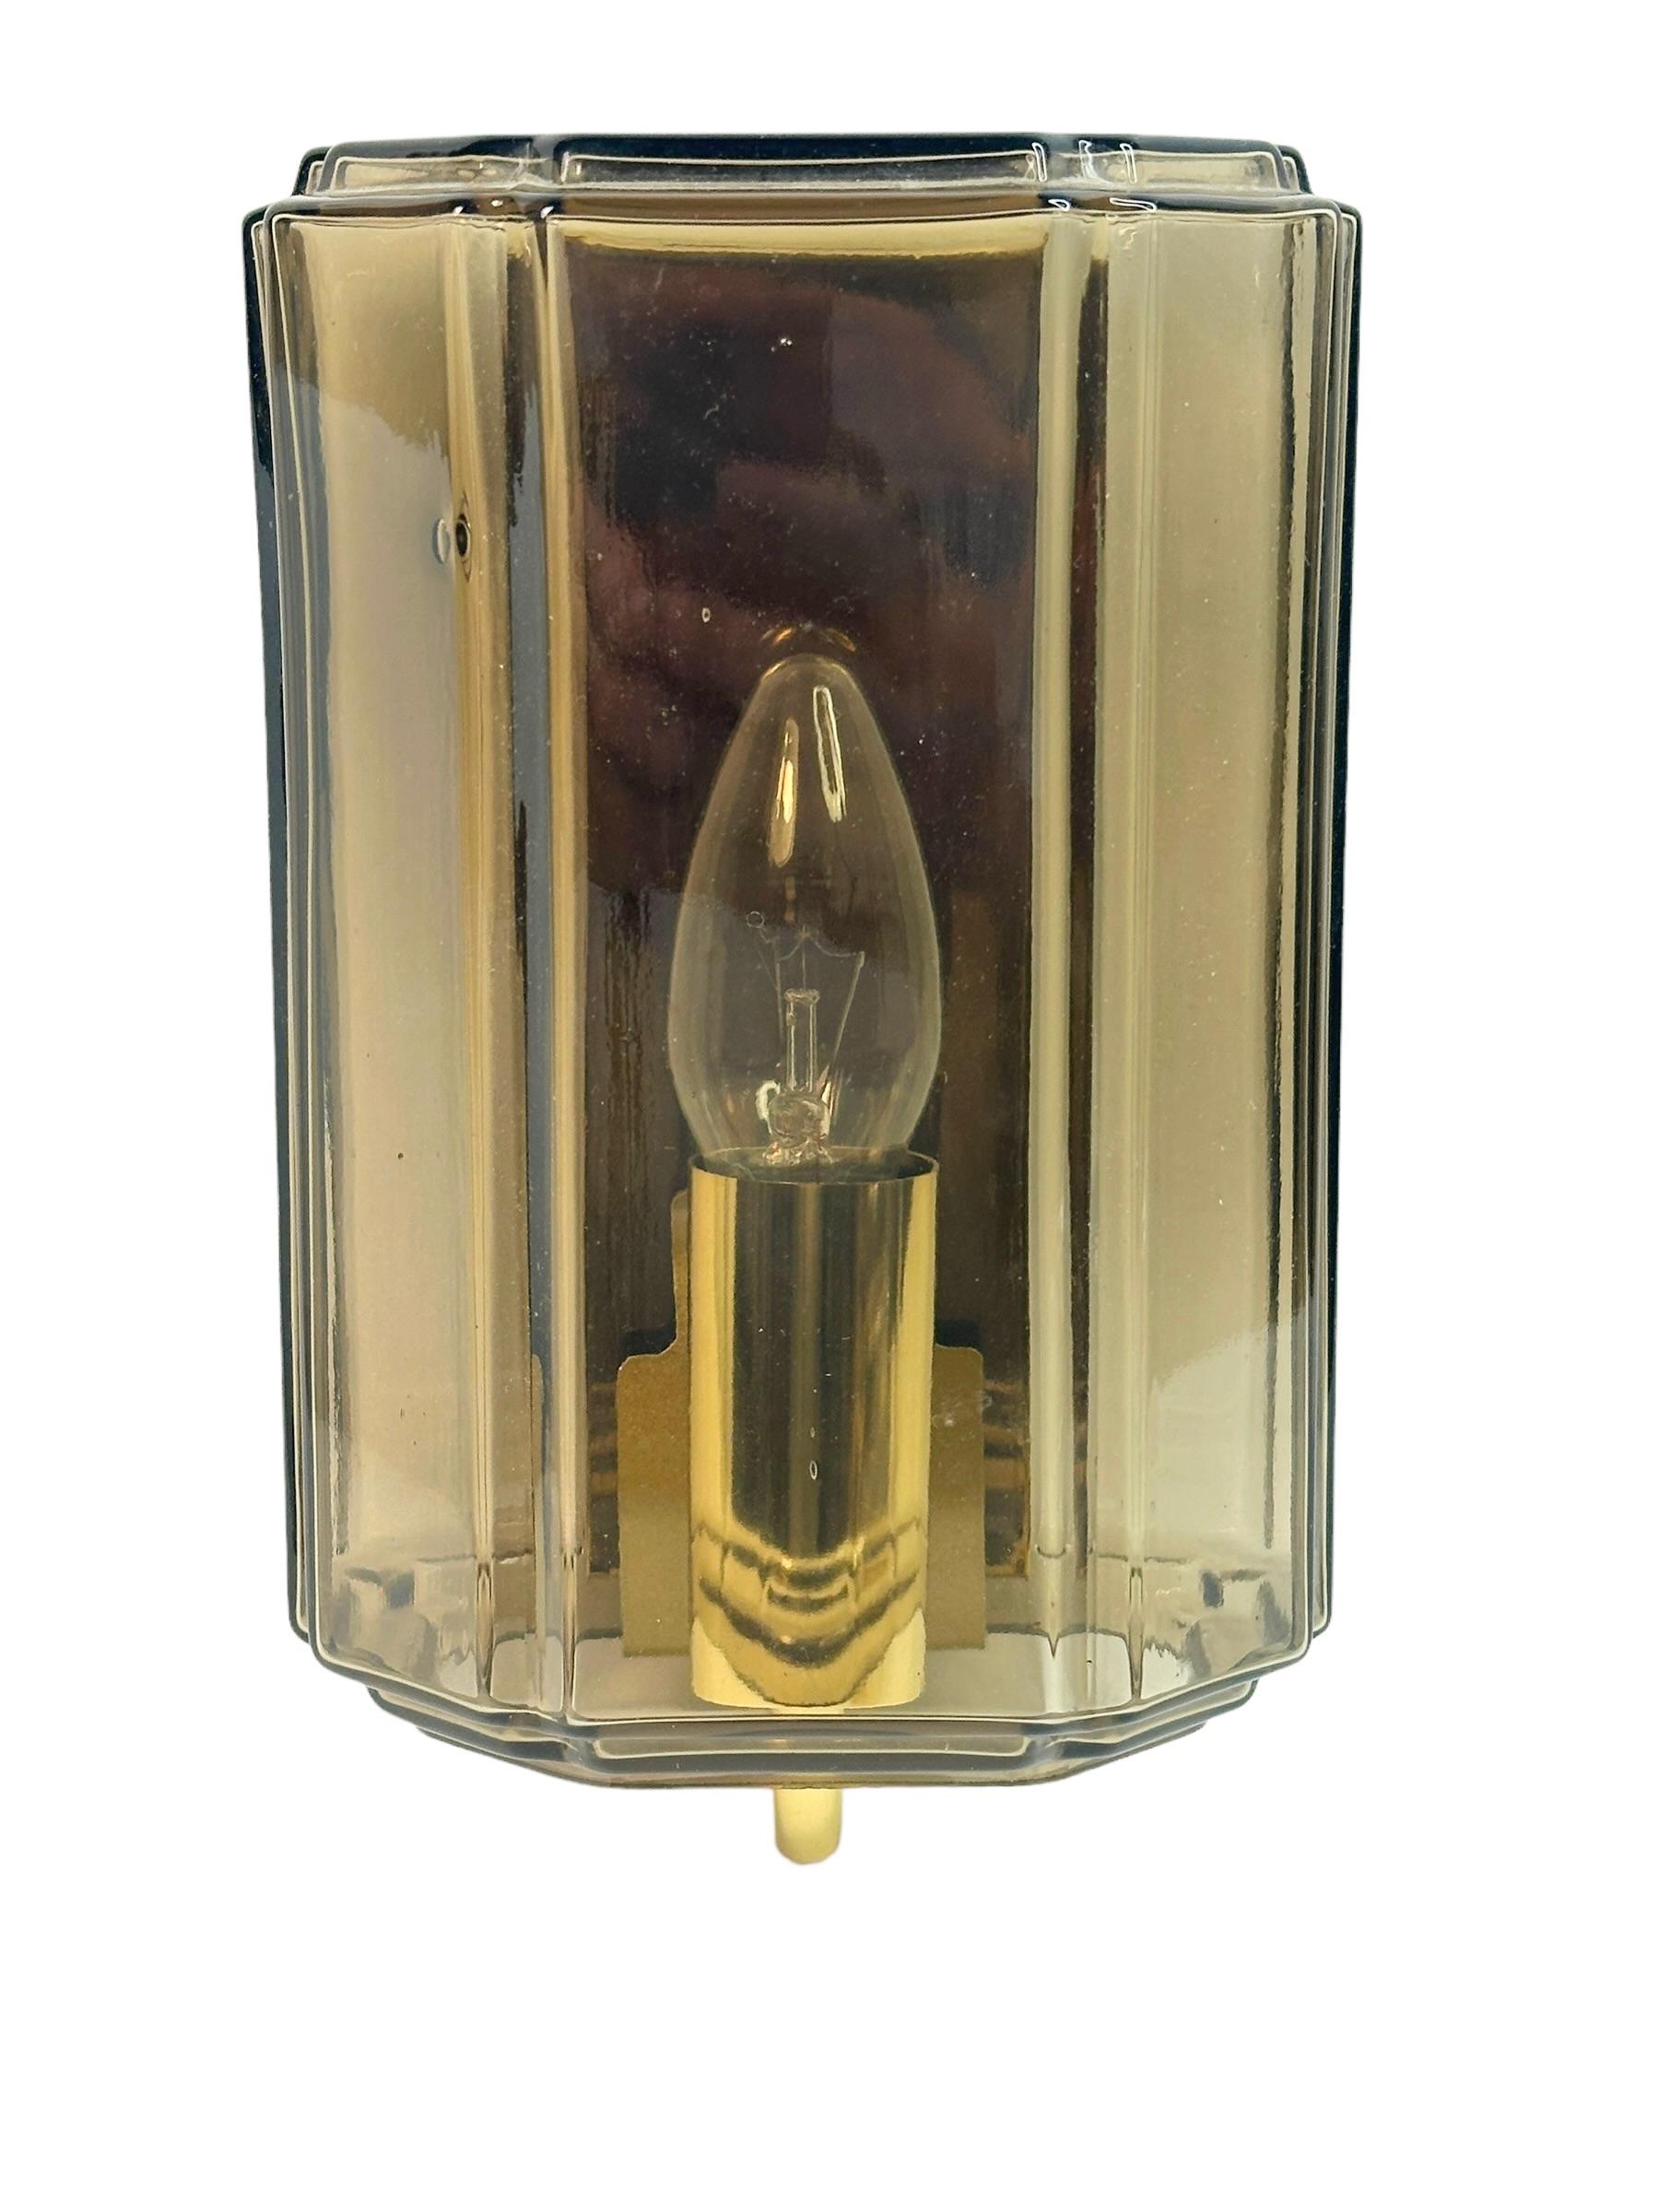 A beautiful and rare midcentury amber glass sconce designed for Glashuette Limburg (Germany, 1960s). The amber or champagne colored hand blown glass shade casts a wonderful light (see image). A Mid-Century Modern design Classic. Cleaned and ready to